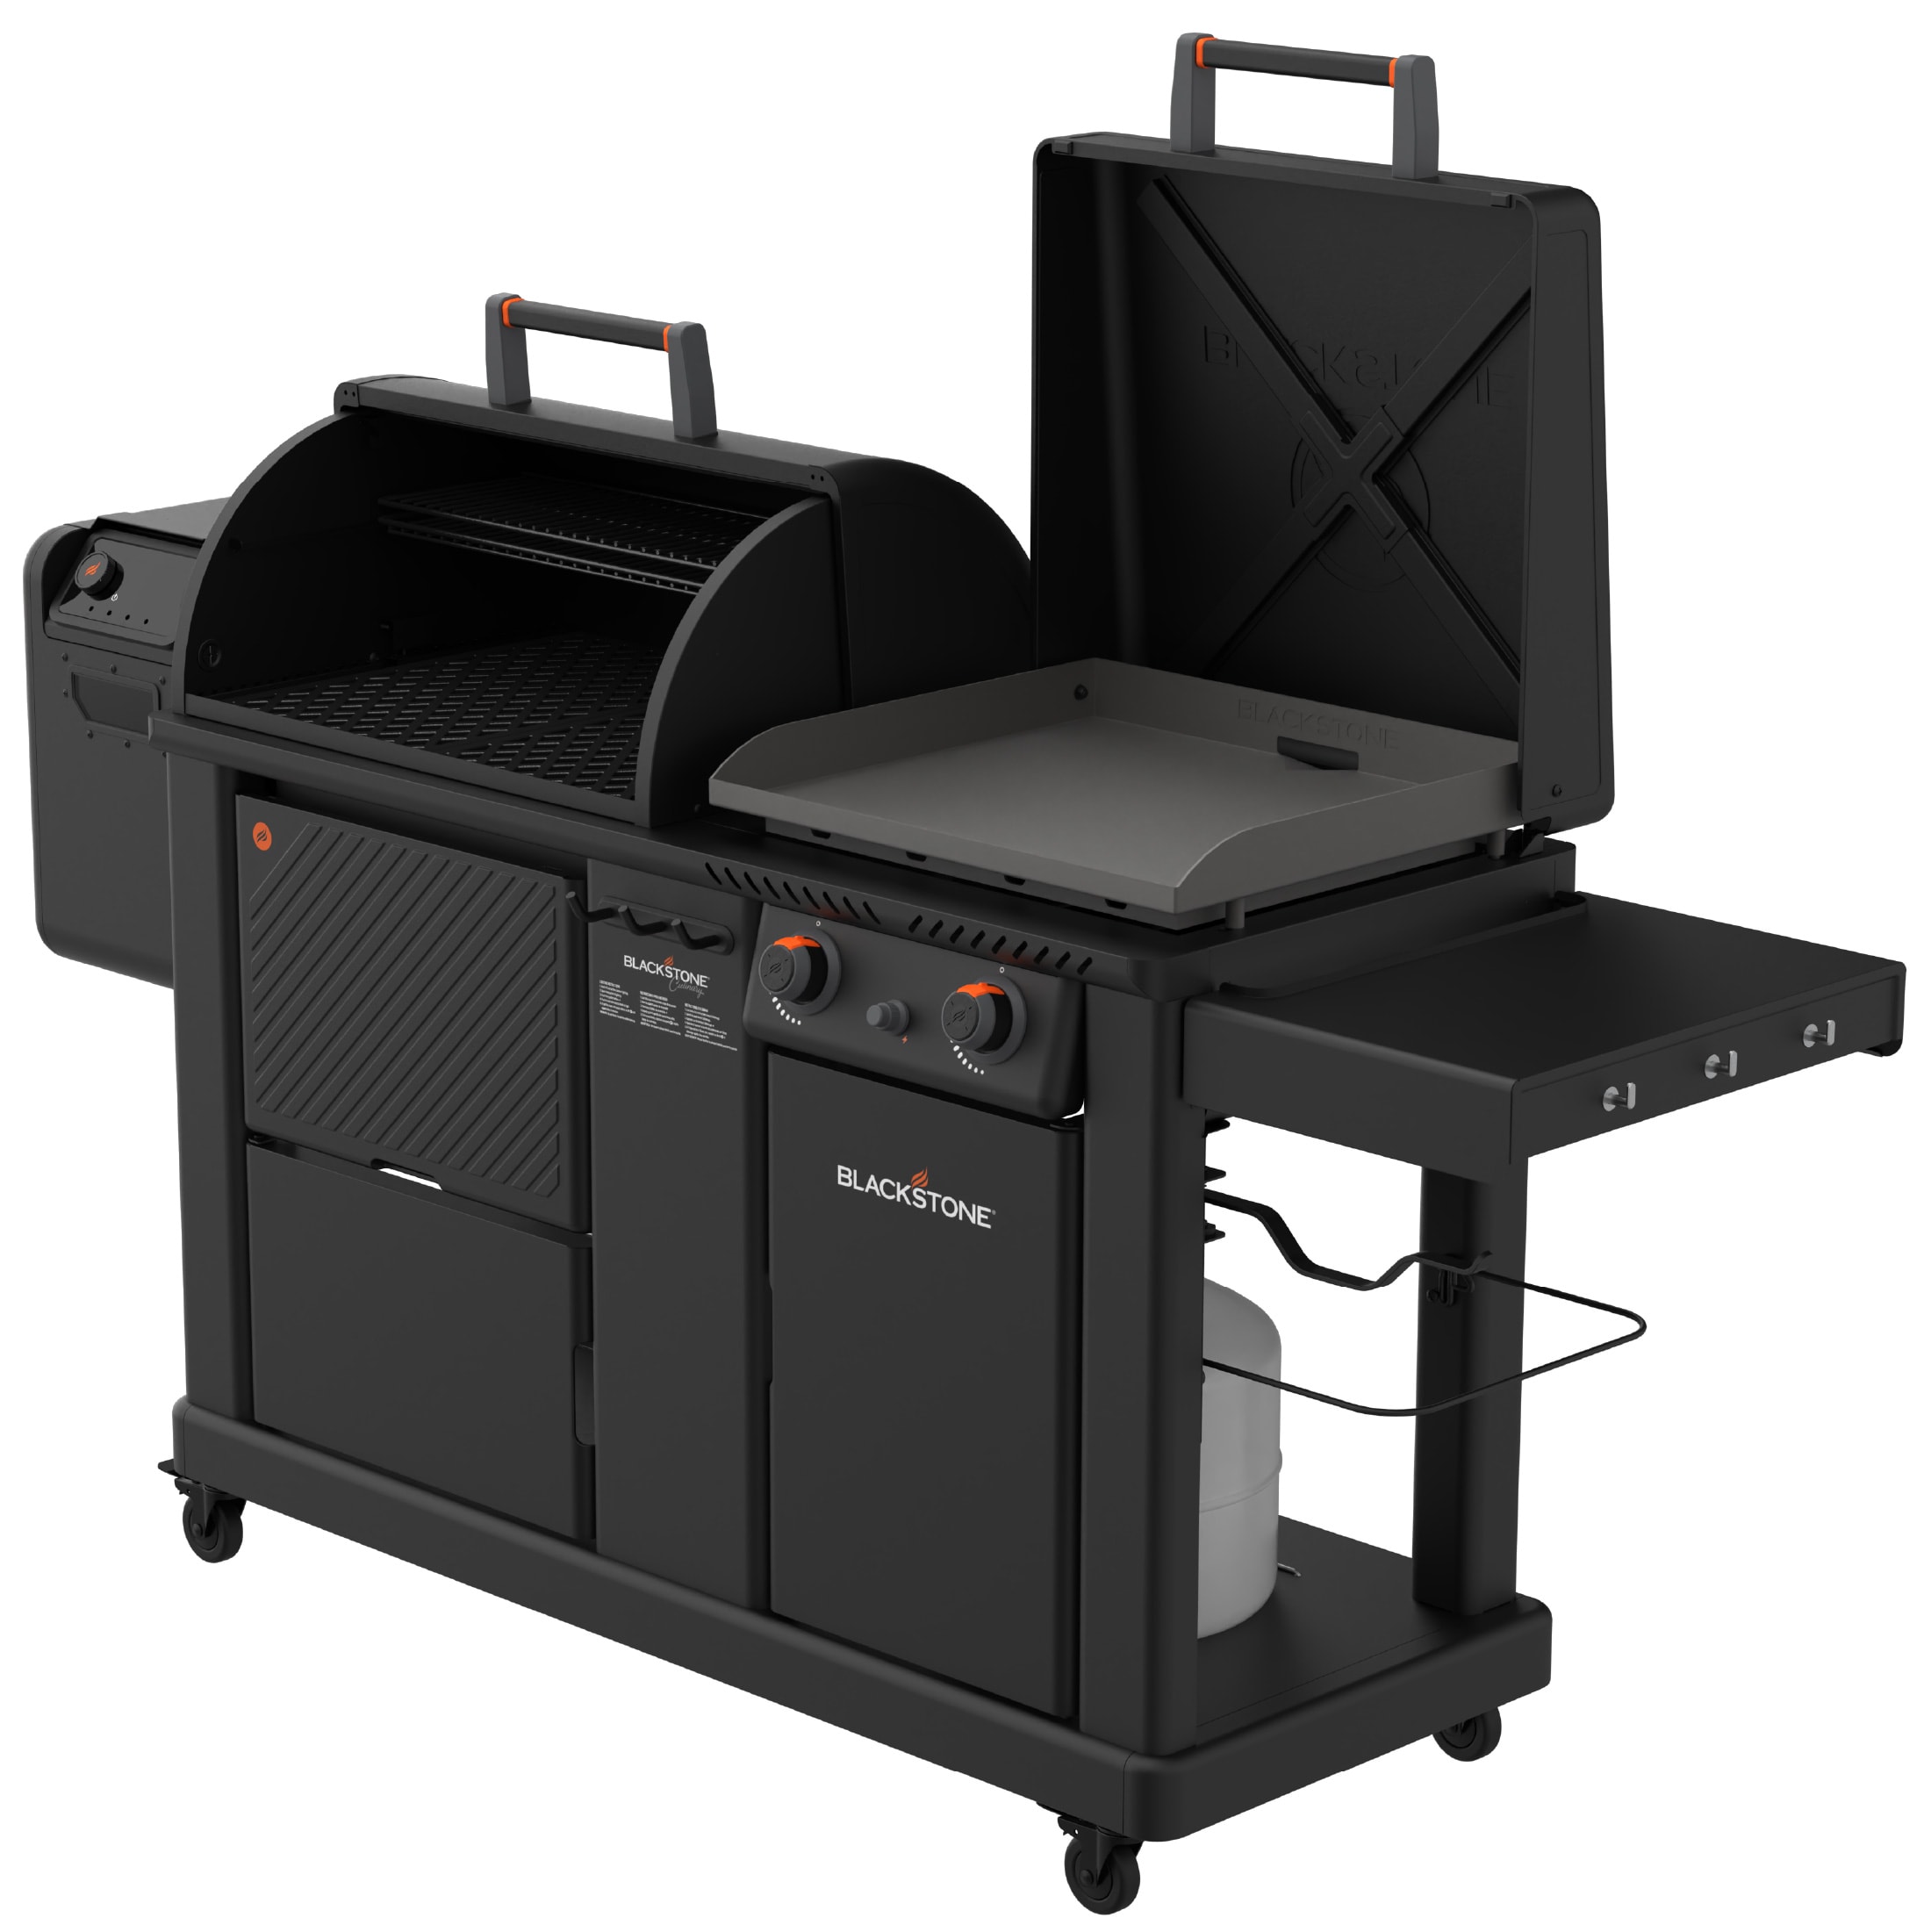 Blackstone Grills & Outdoor Cooking at